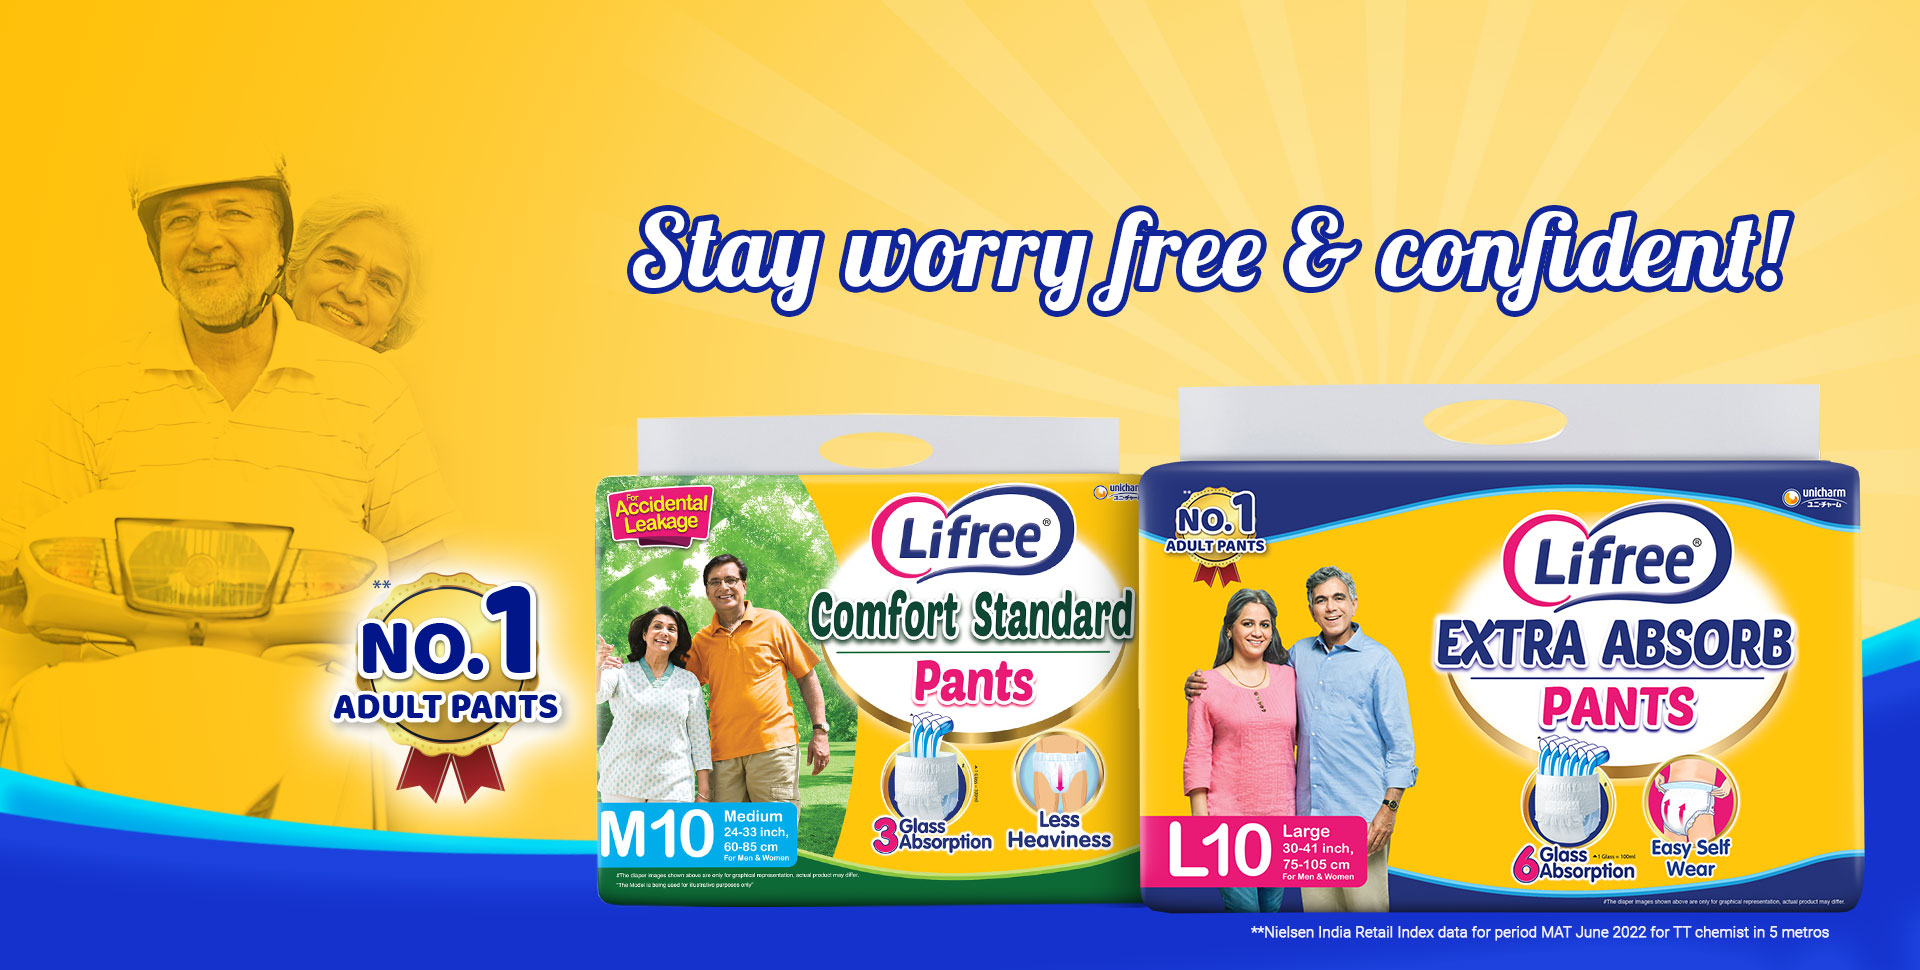 Lifree incontinence care products for adults